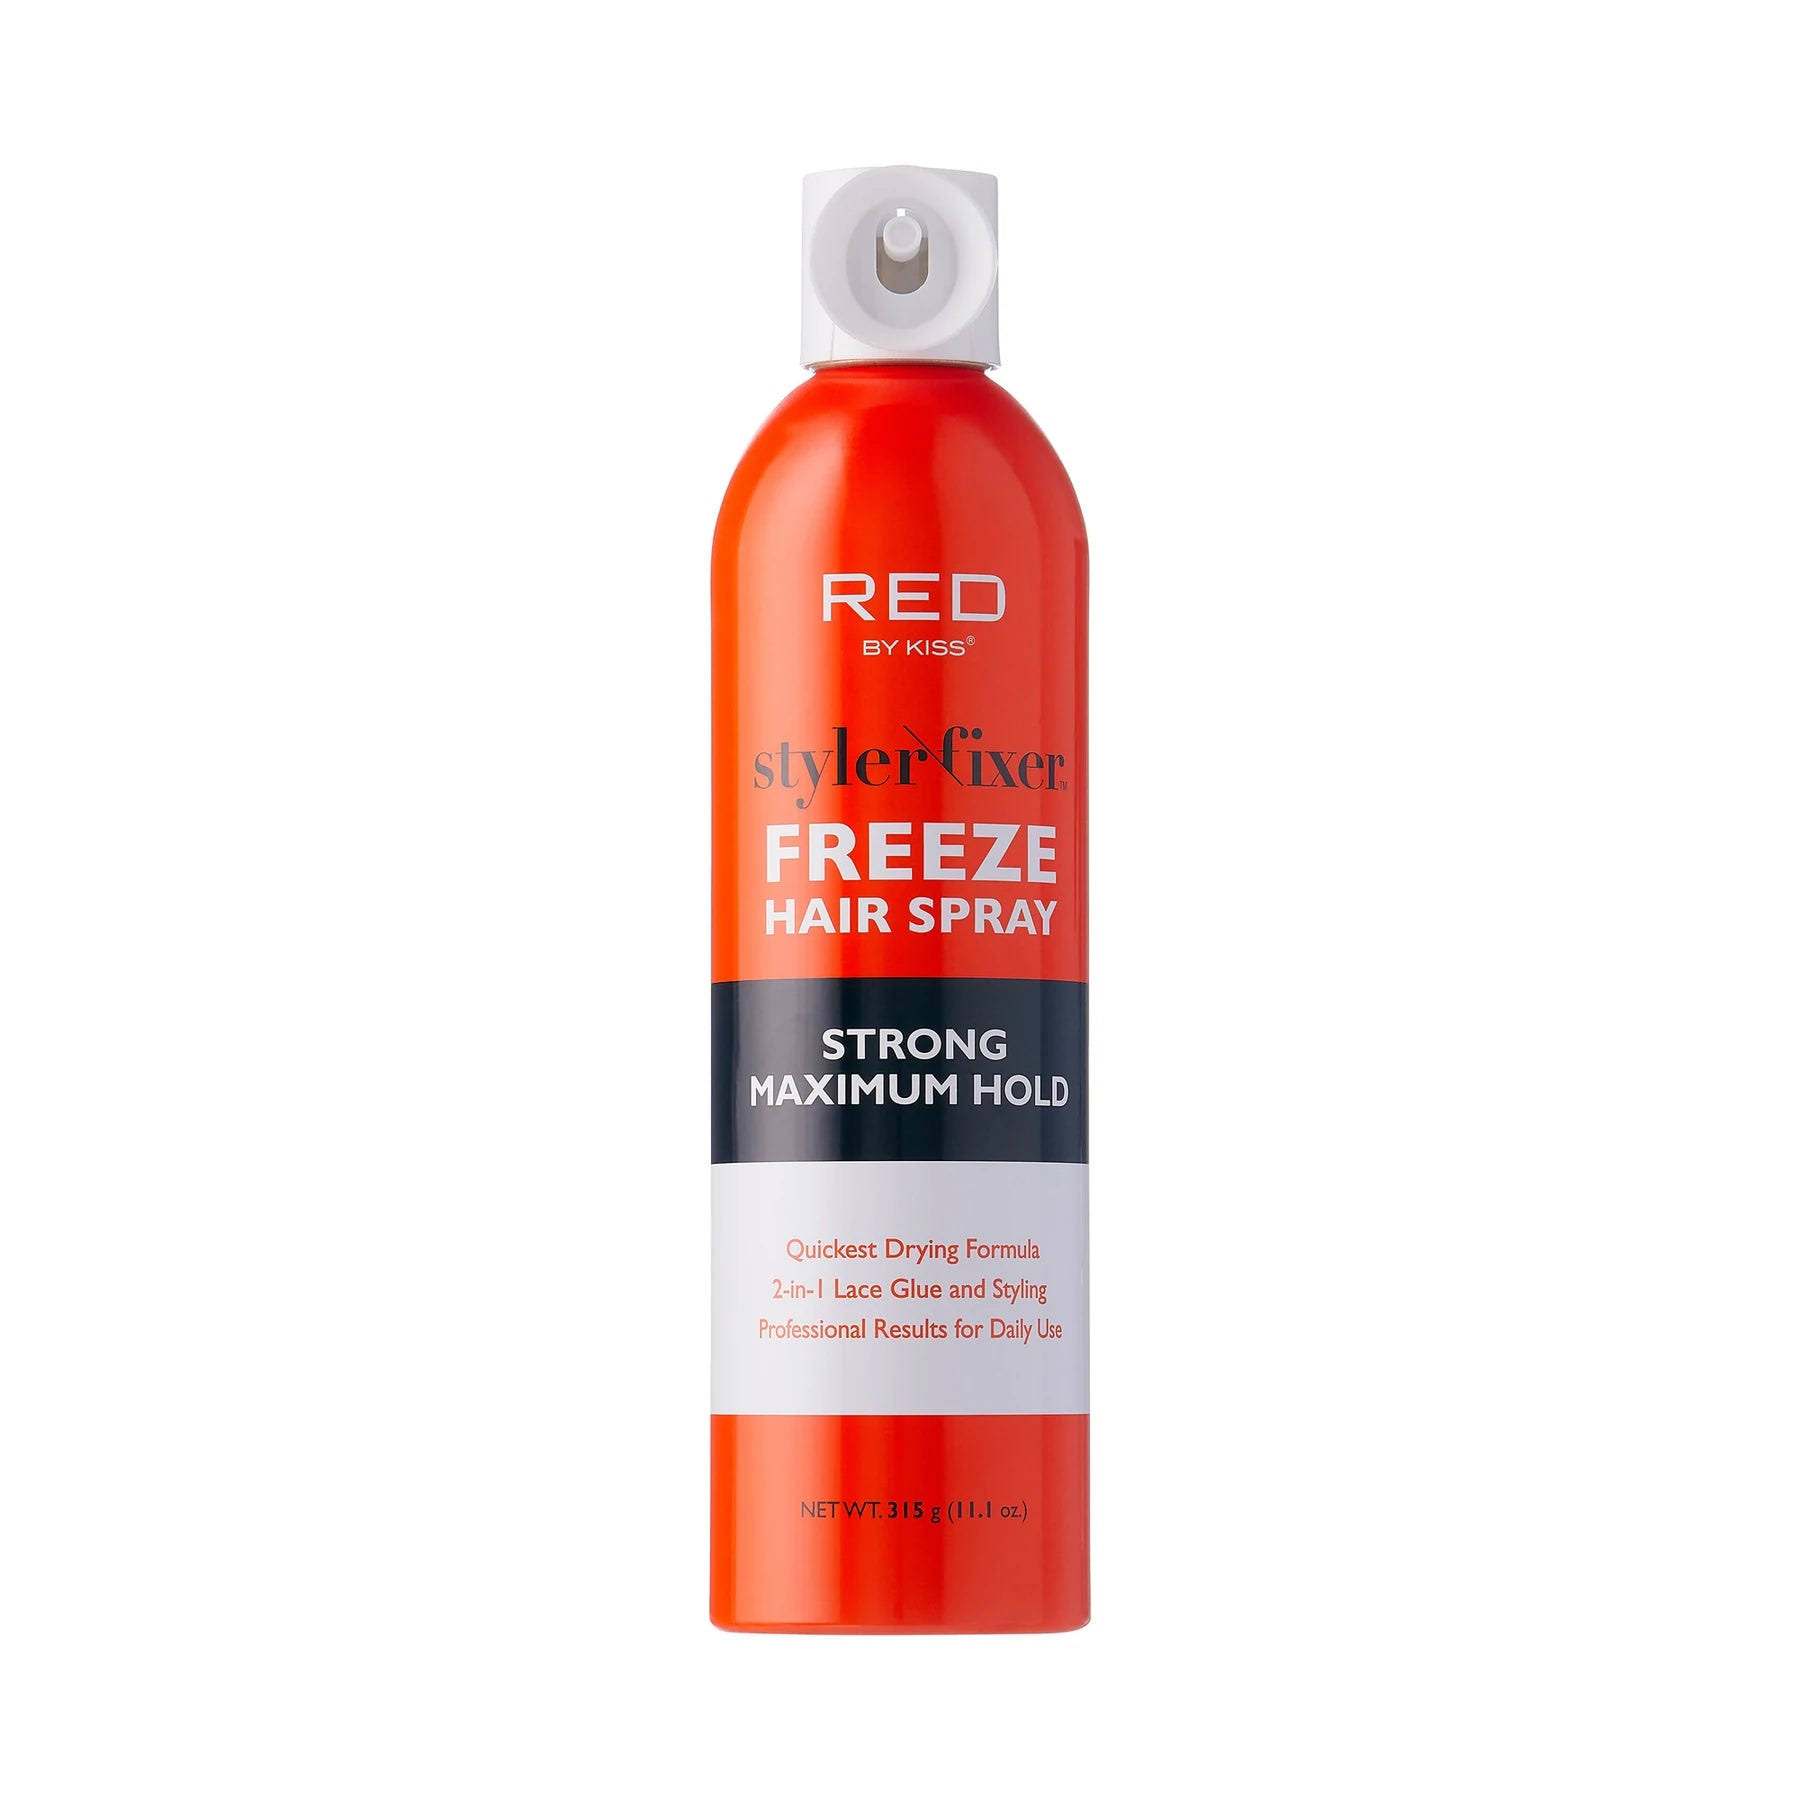 Red by Kiss Styler Fixer Freeze Hair Spray 11 oz